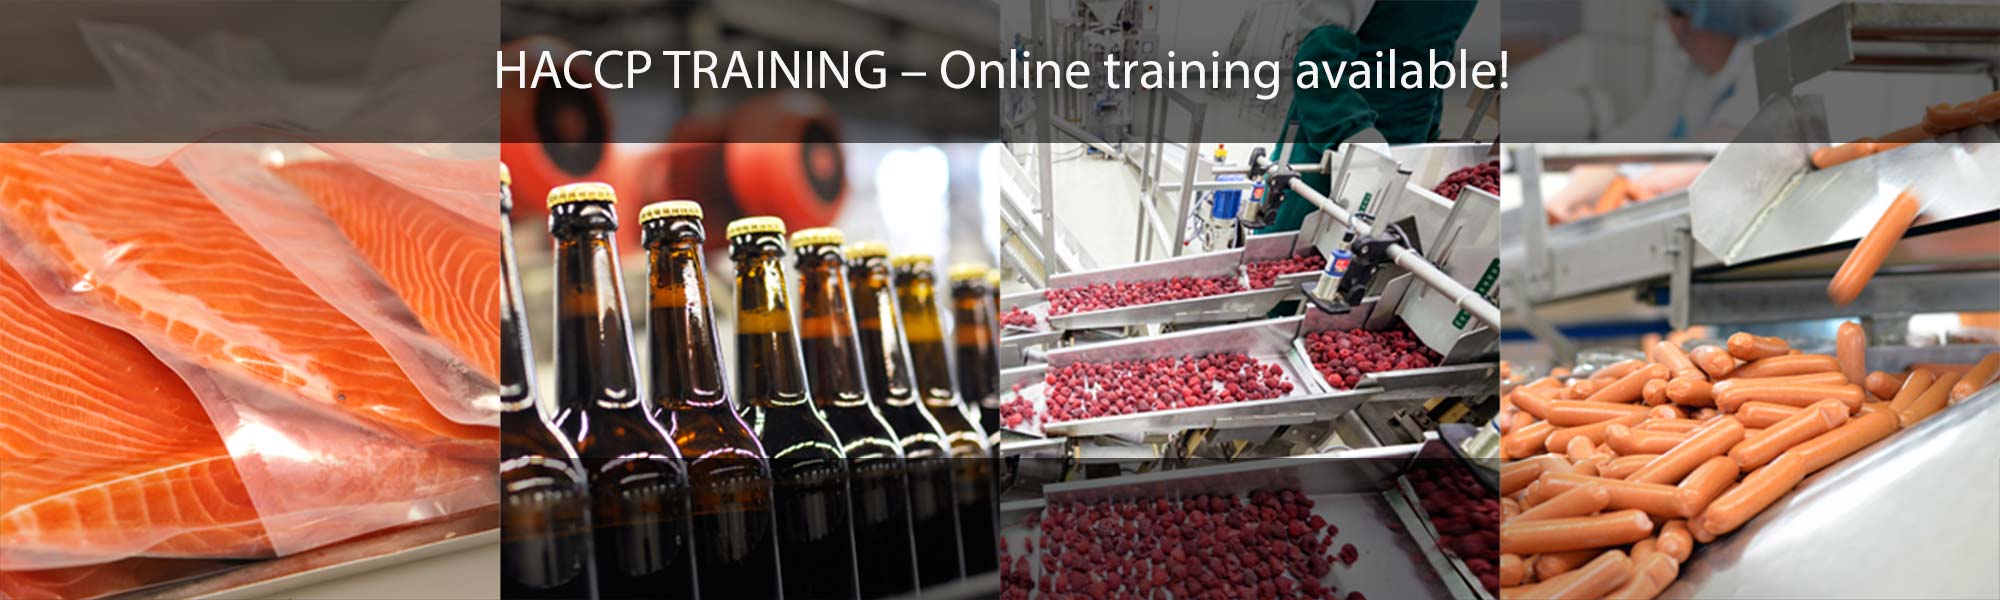 HACCP Online Training Available